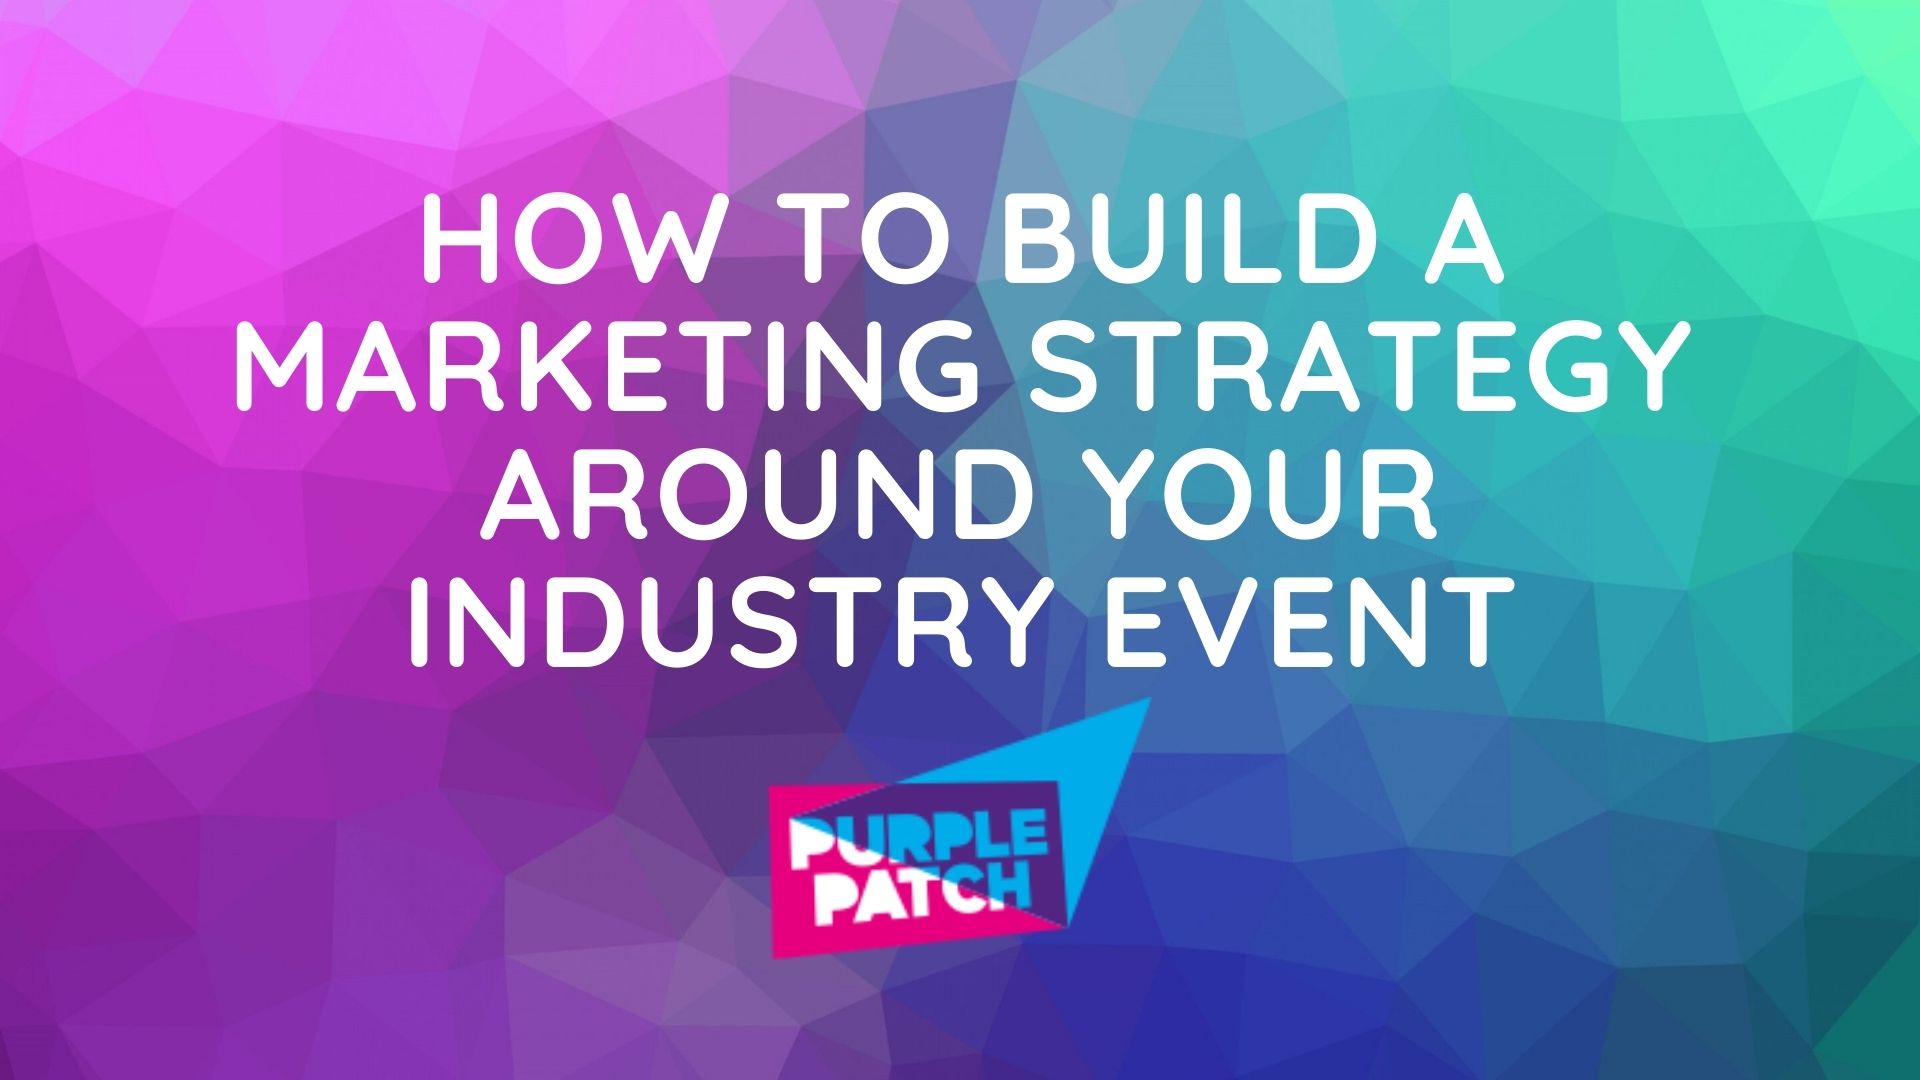 How To Build A Marketing Strategy Around Your Industry Event